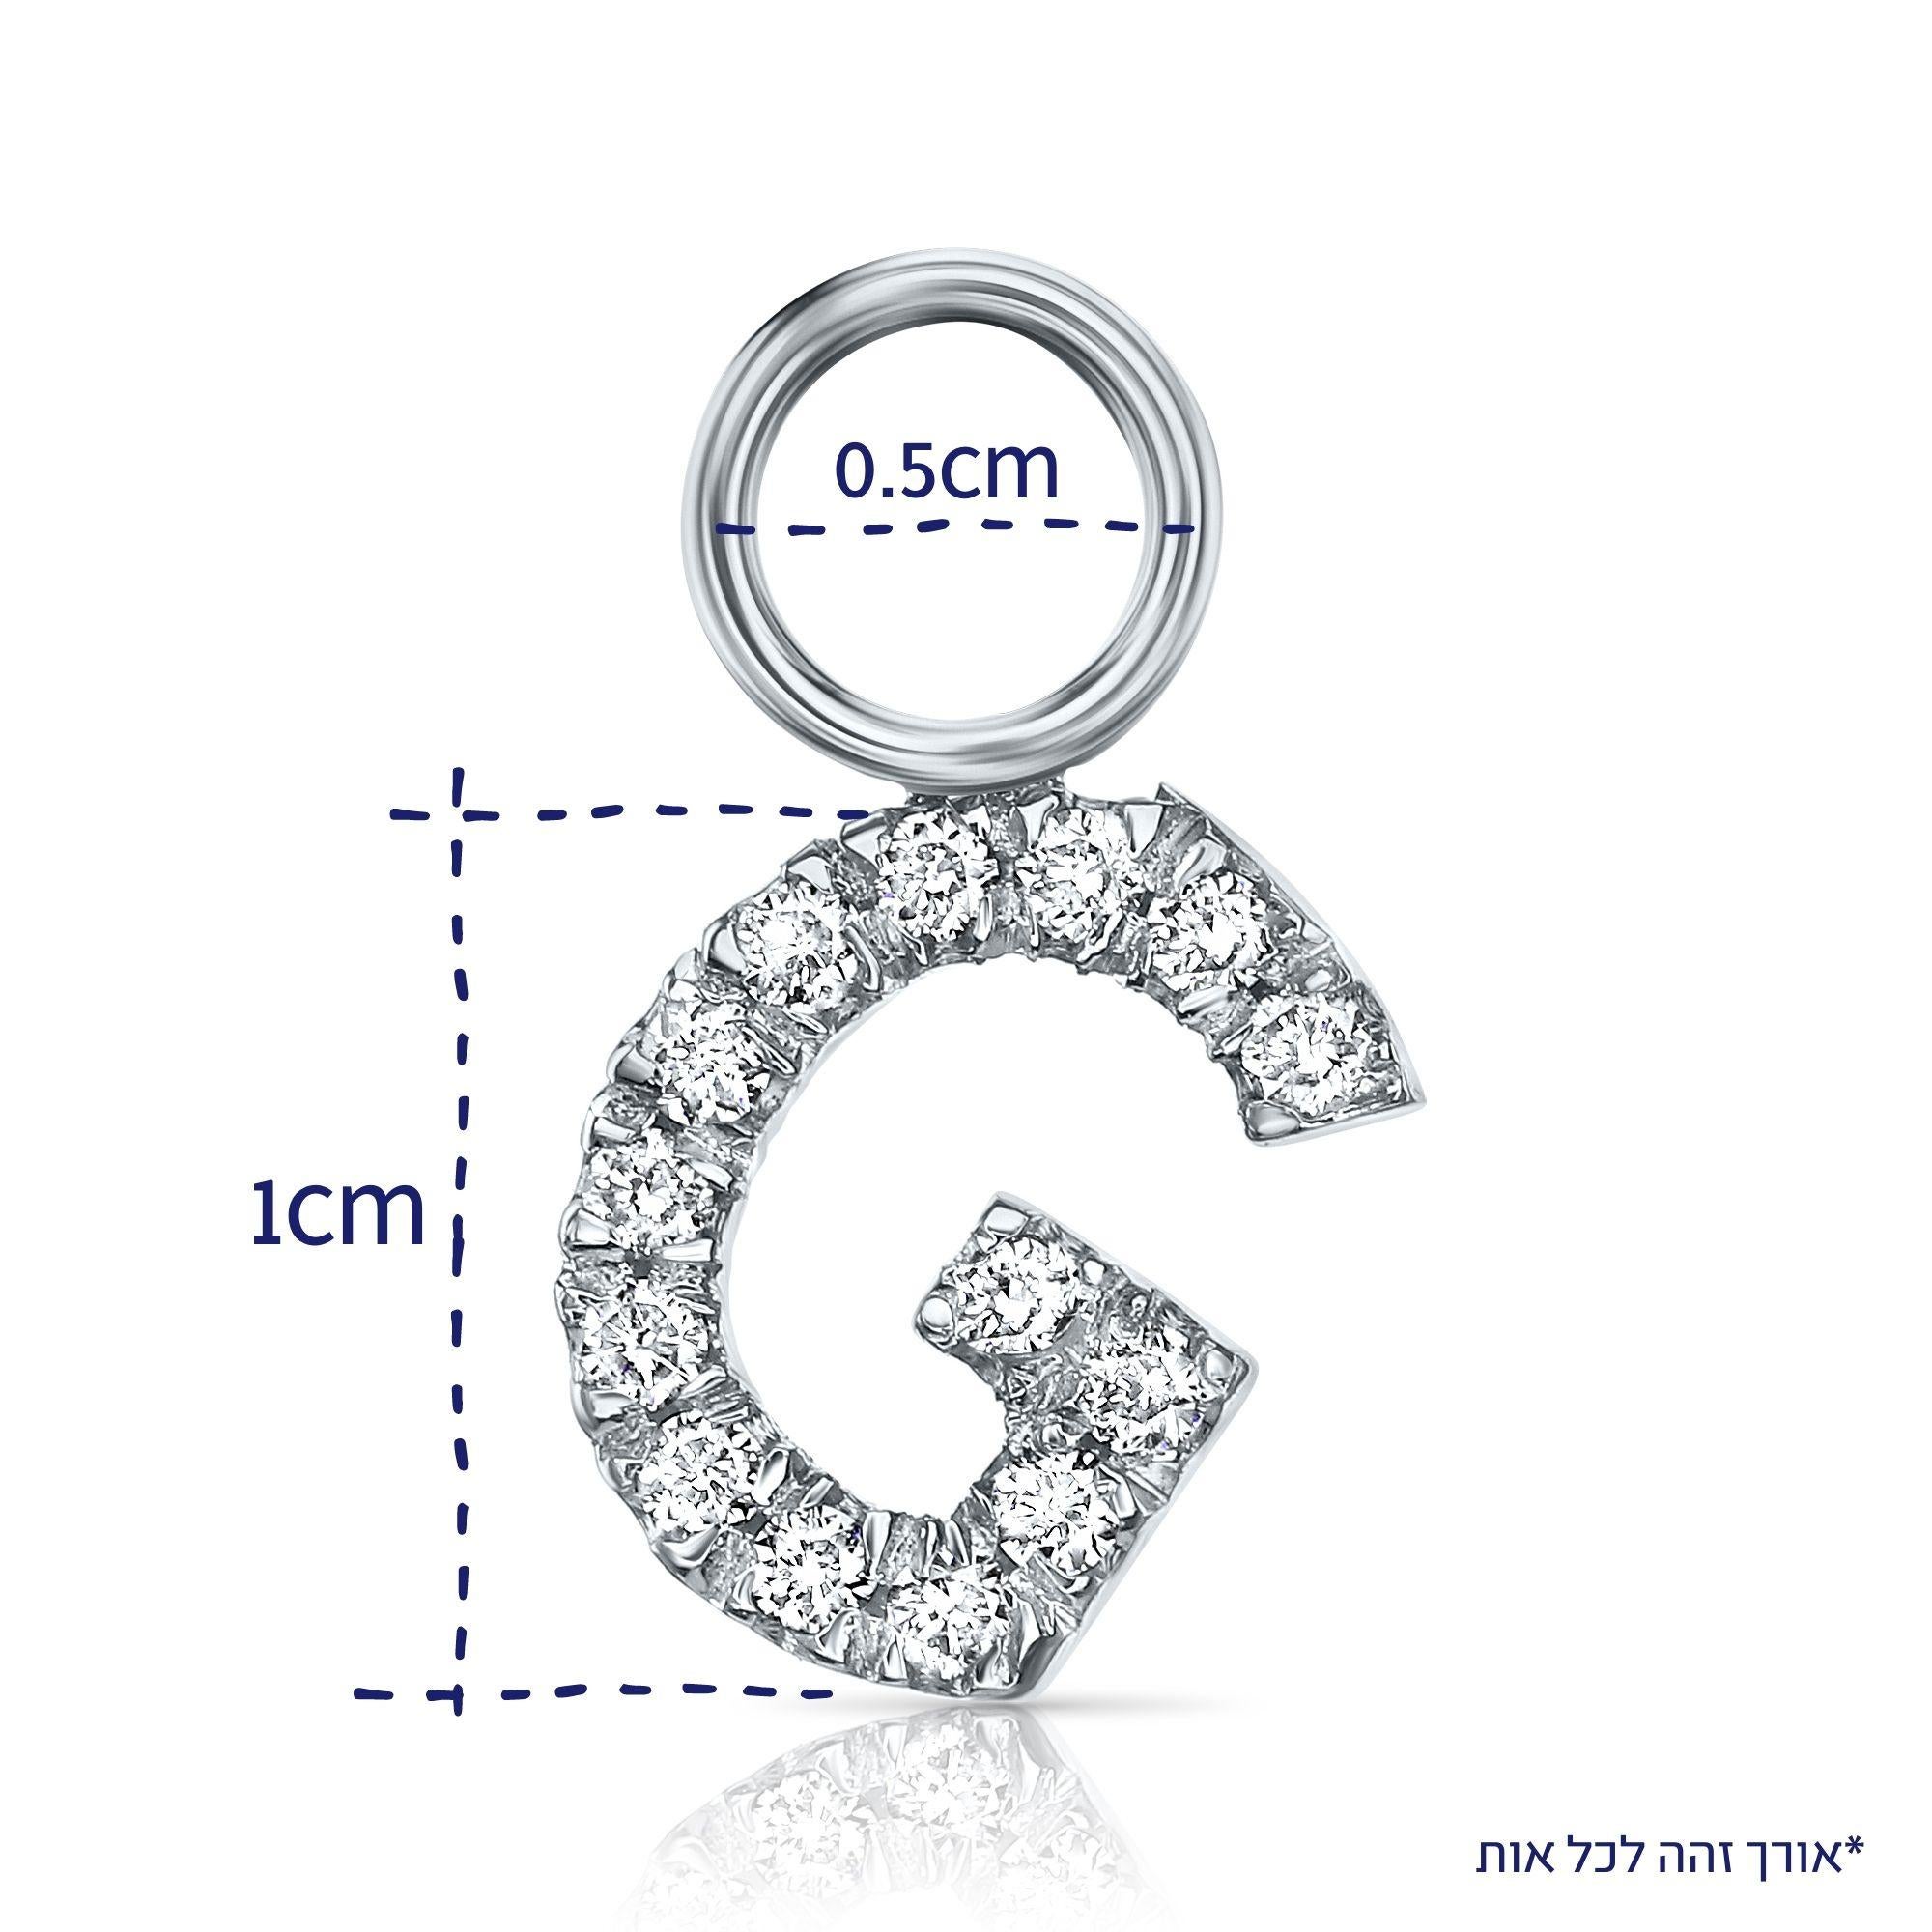 Genuine Diamond Single Initial Hoop Charm in 14k White Gold, Shlomit Rogel

Make it personal!
Beautifully handcrafted in 14k white gold, this single hoop charm features an initial of your choice embellished with genuine diamonds for a sparkly touch.